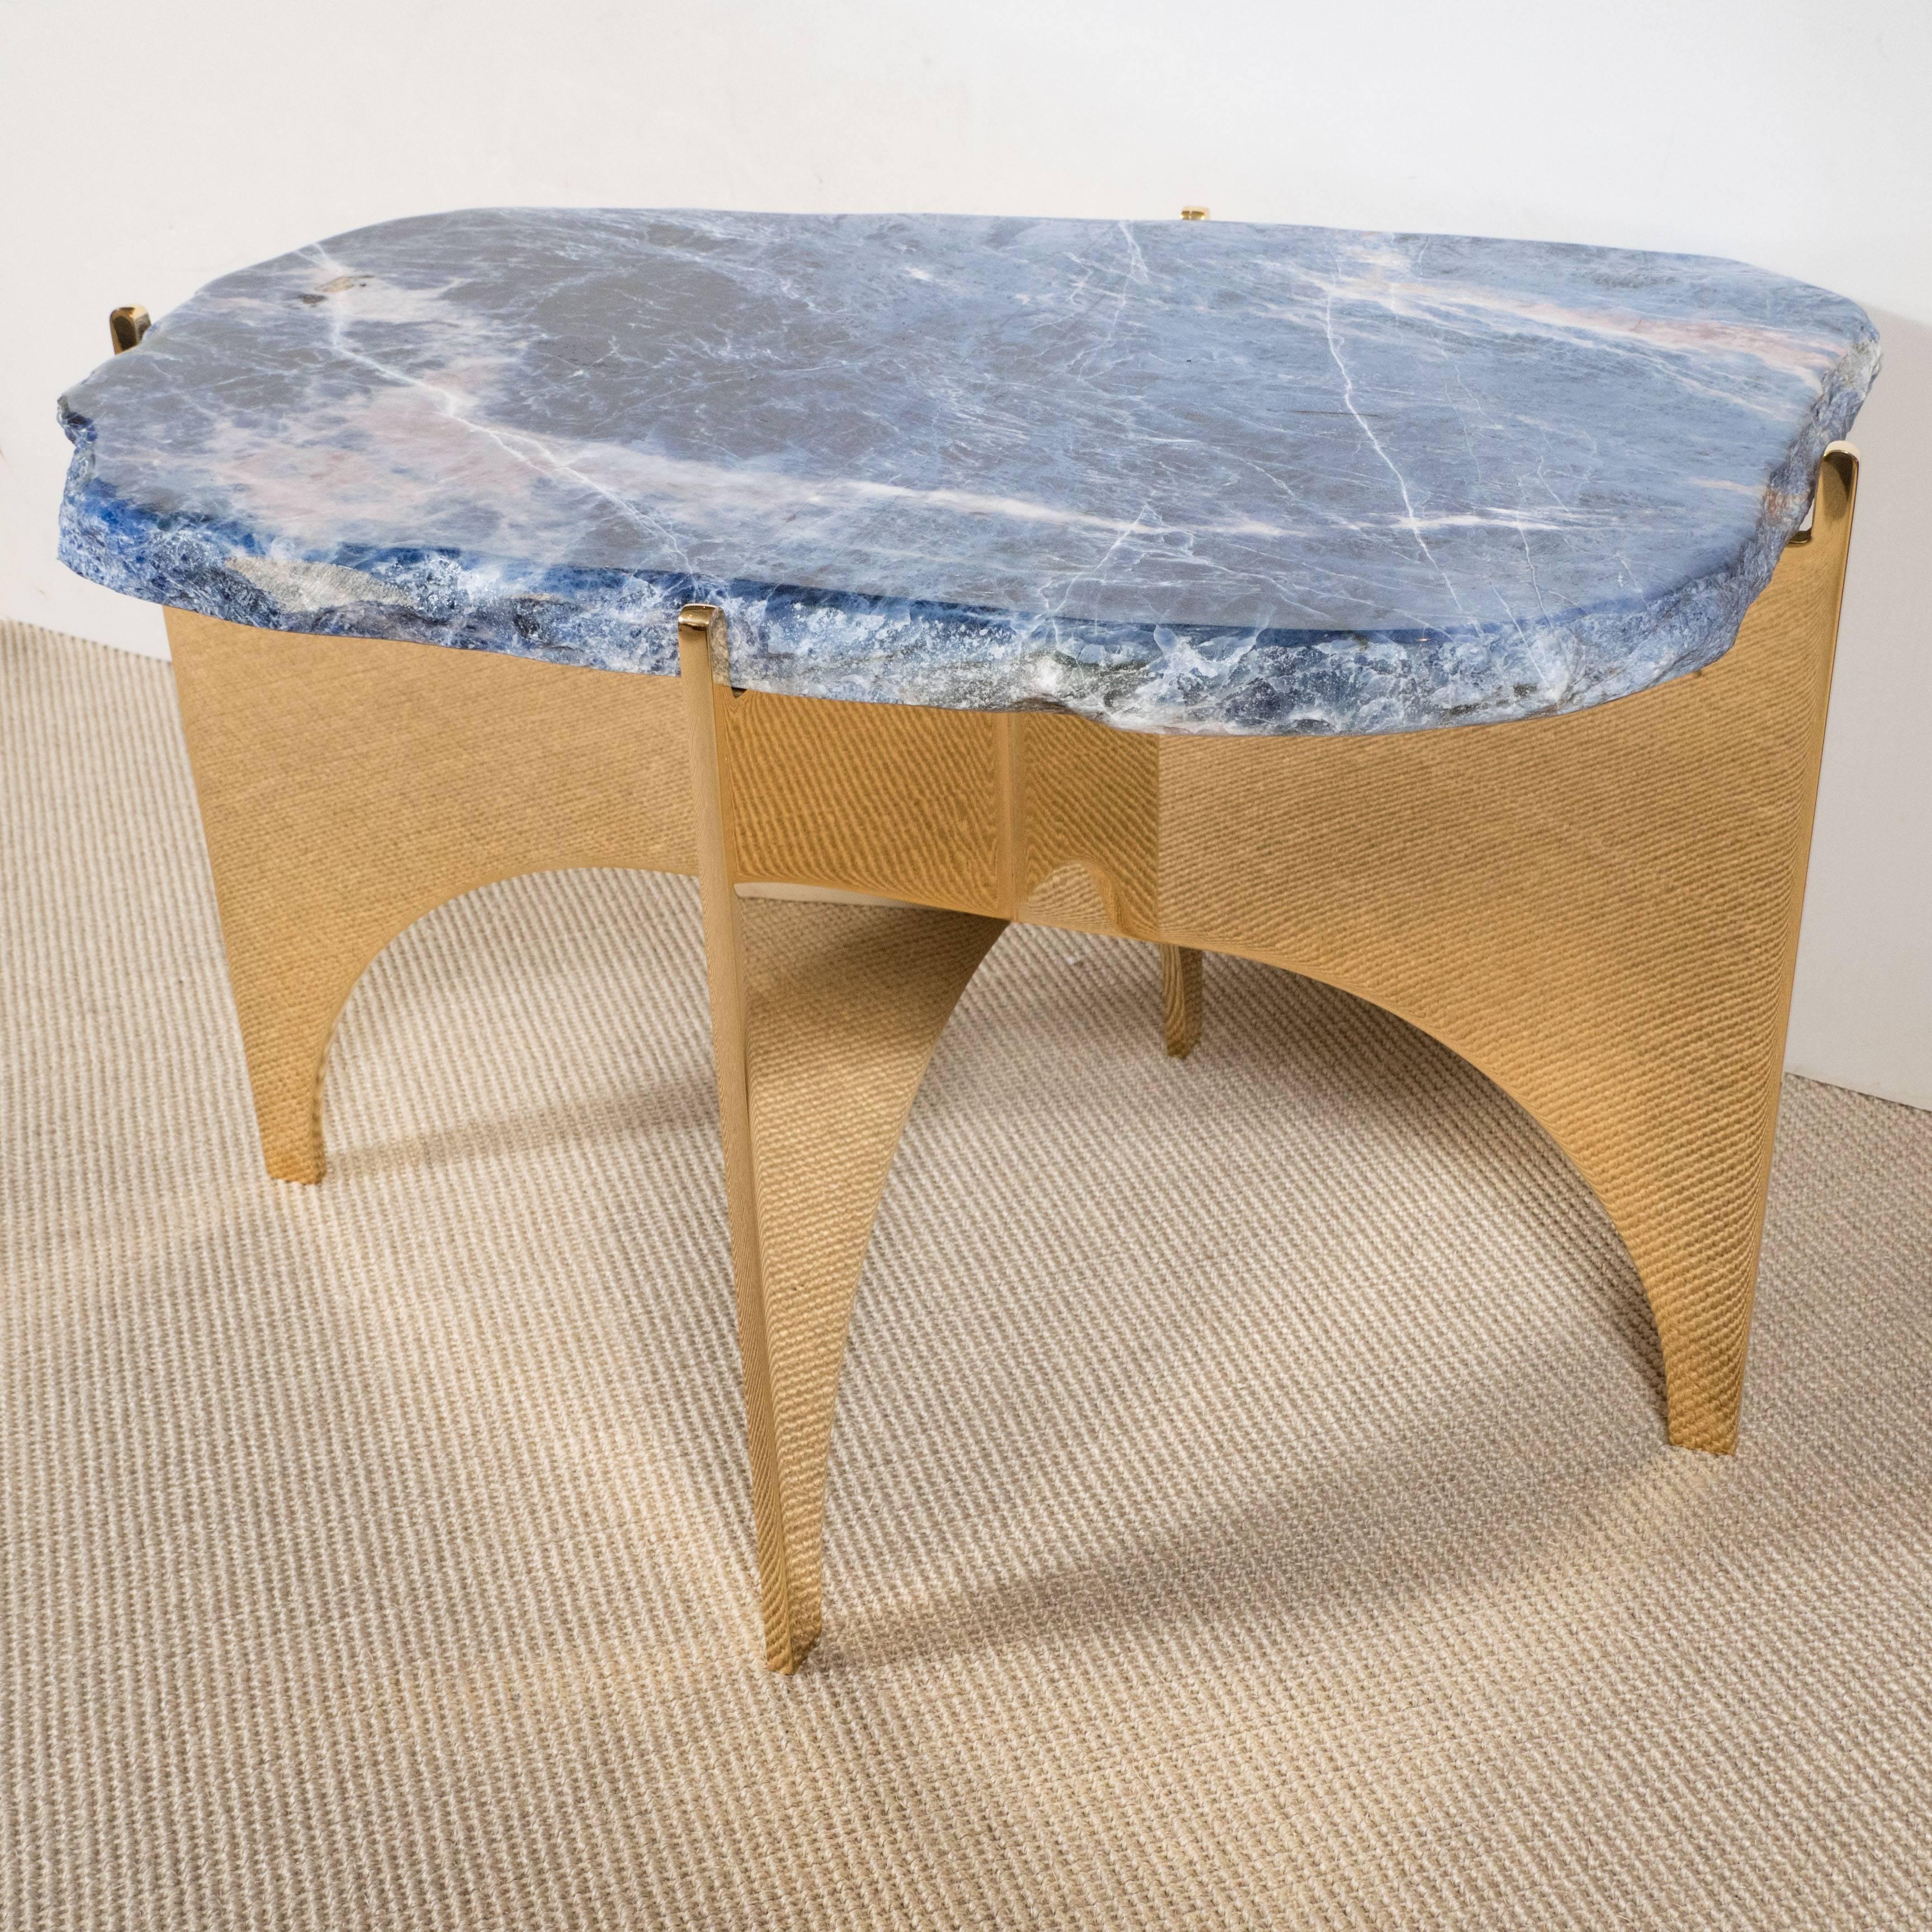 Sodalight Gemstone Top Table with Mirror Polished Bronze Base In Excellent Condition For Sale In New York, NY